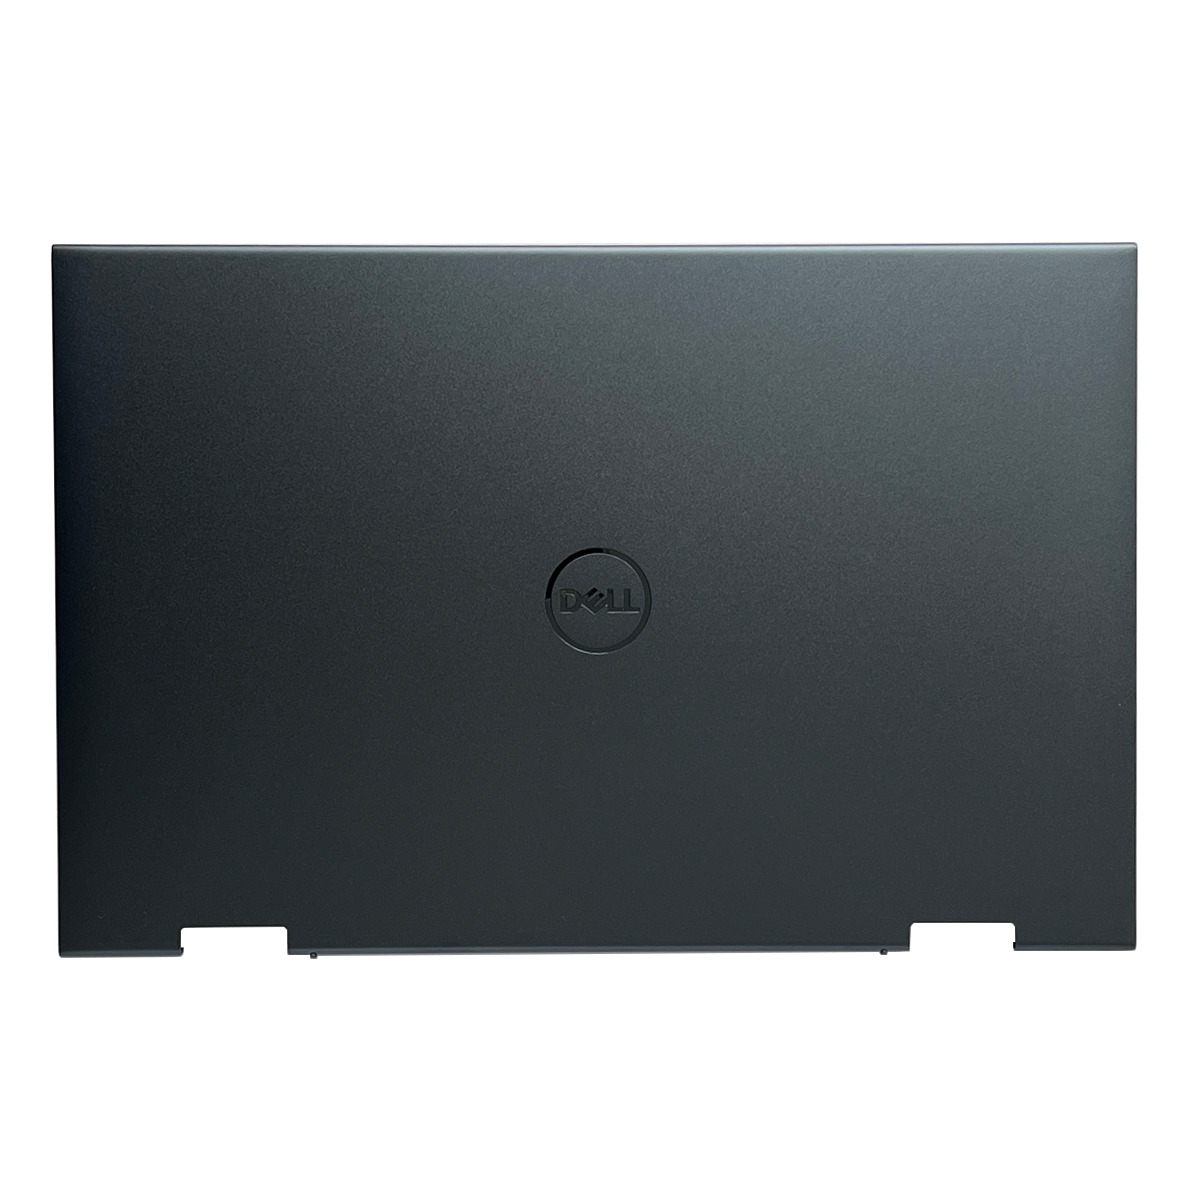 New For Dell Inspiron 5410 7415 2-in-1 LCD Back Cover Top Case Blue + Hinge